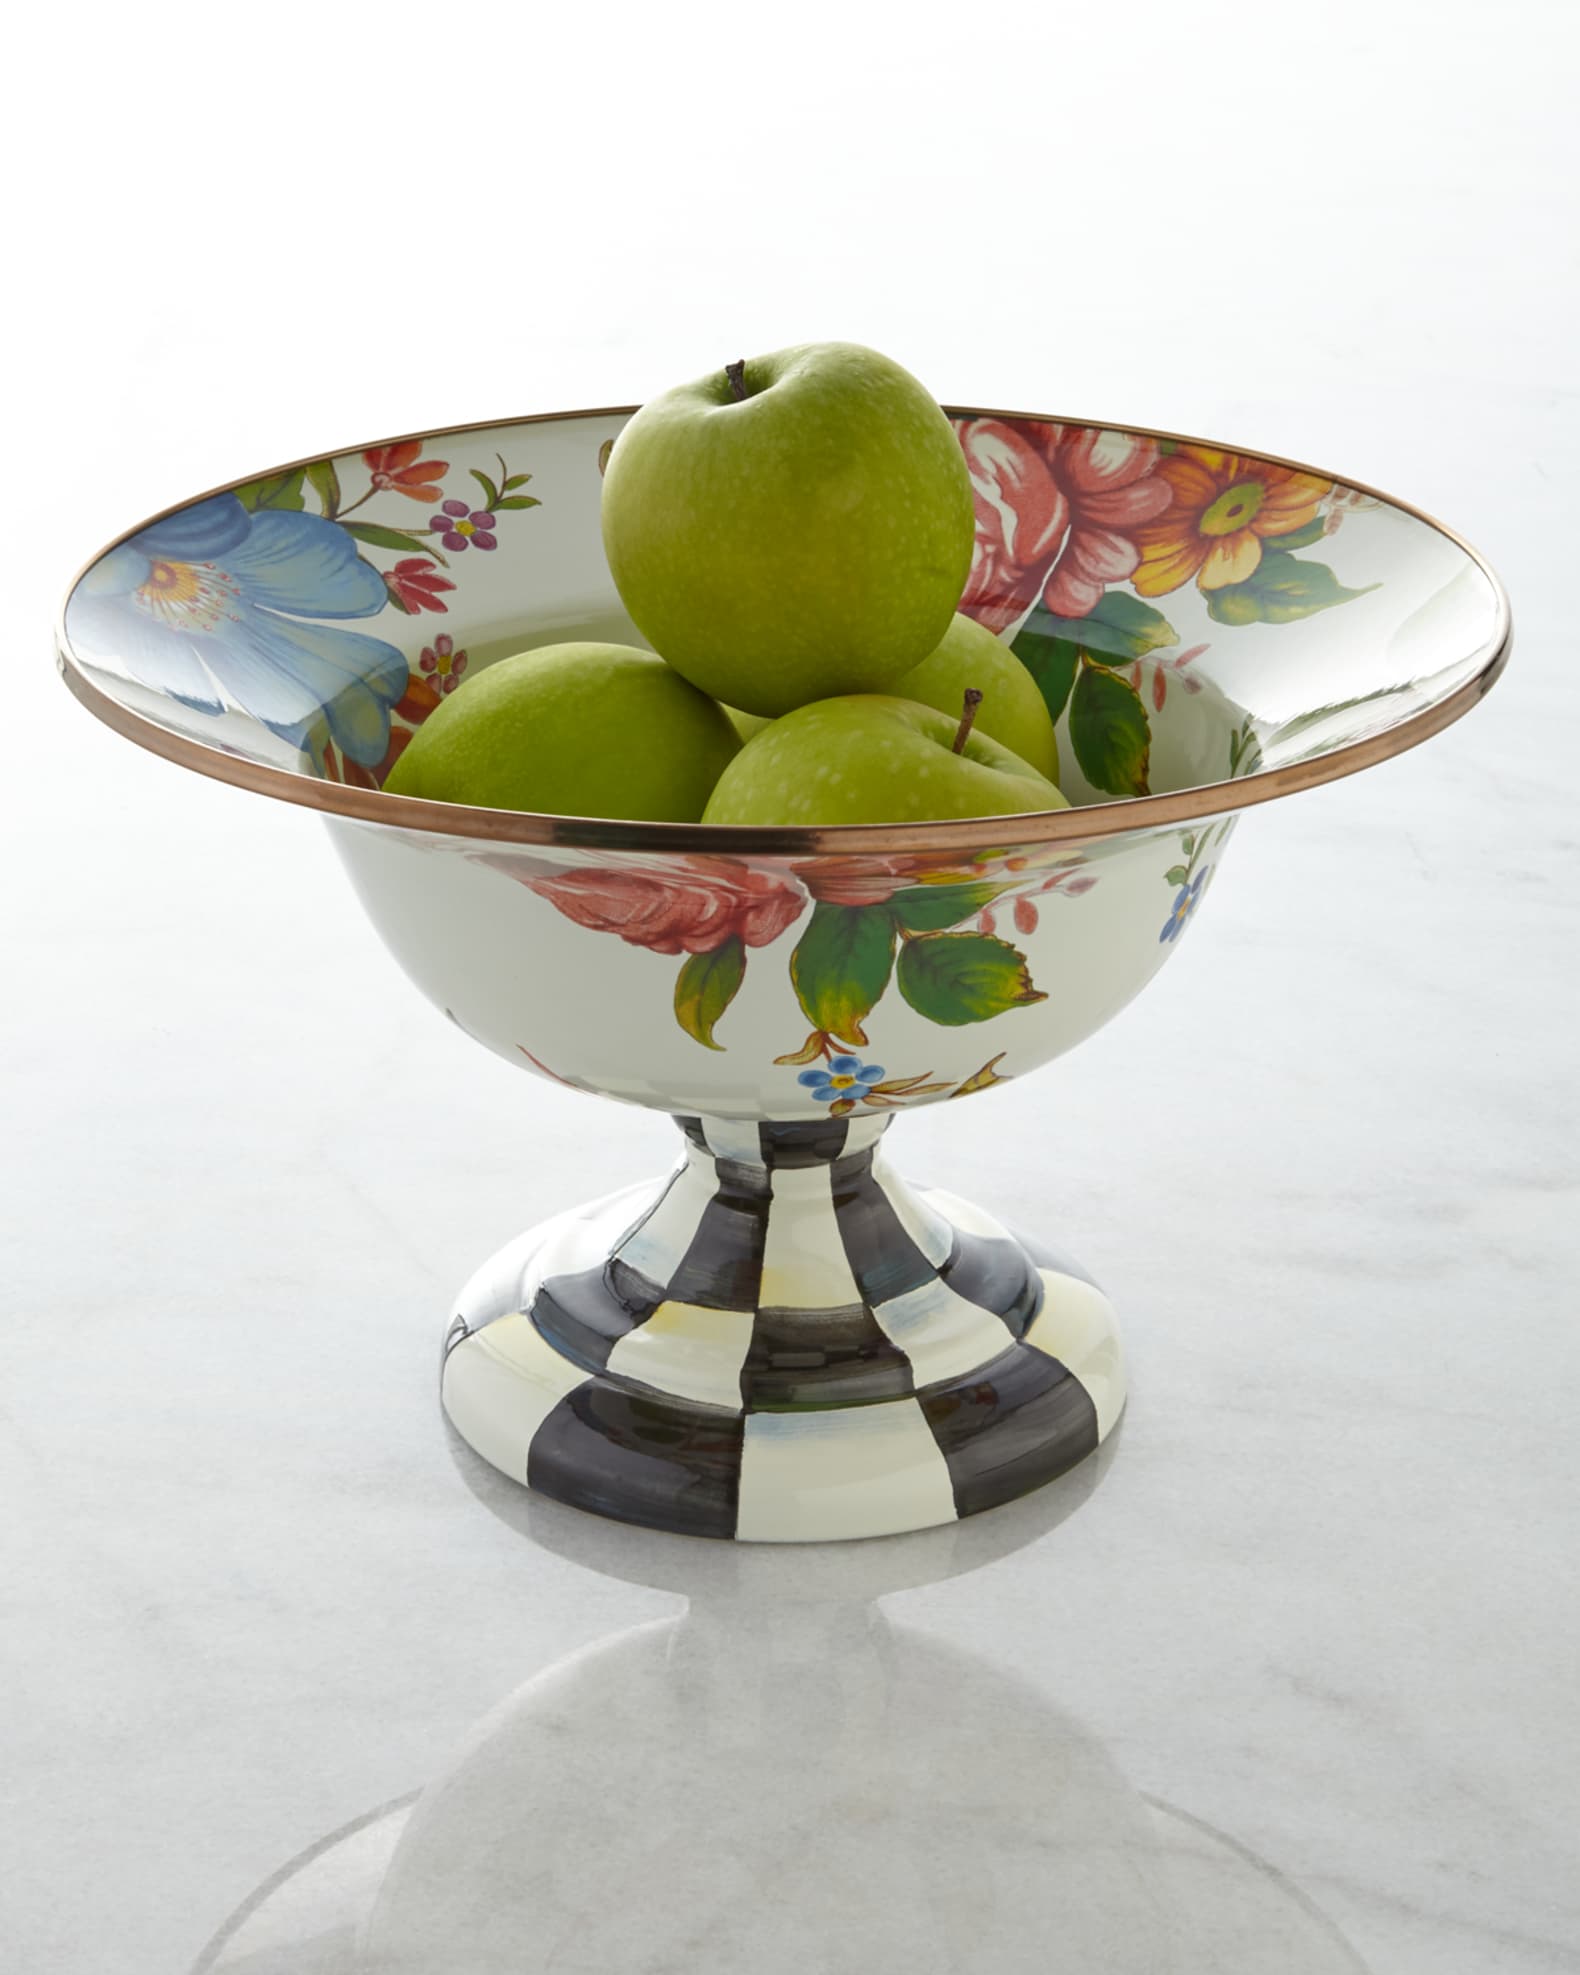 MacKenzie-Childs Large Flower Market Compote